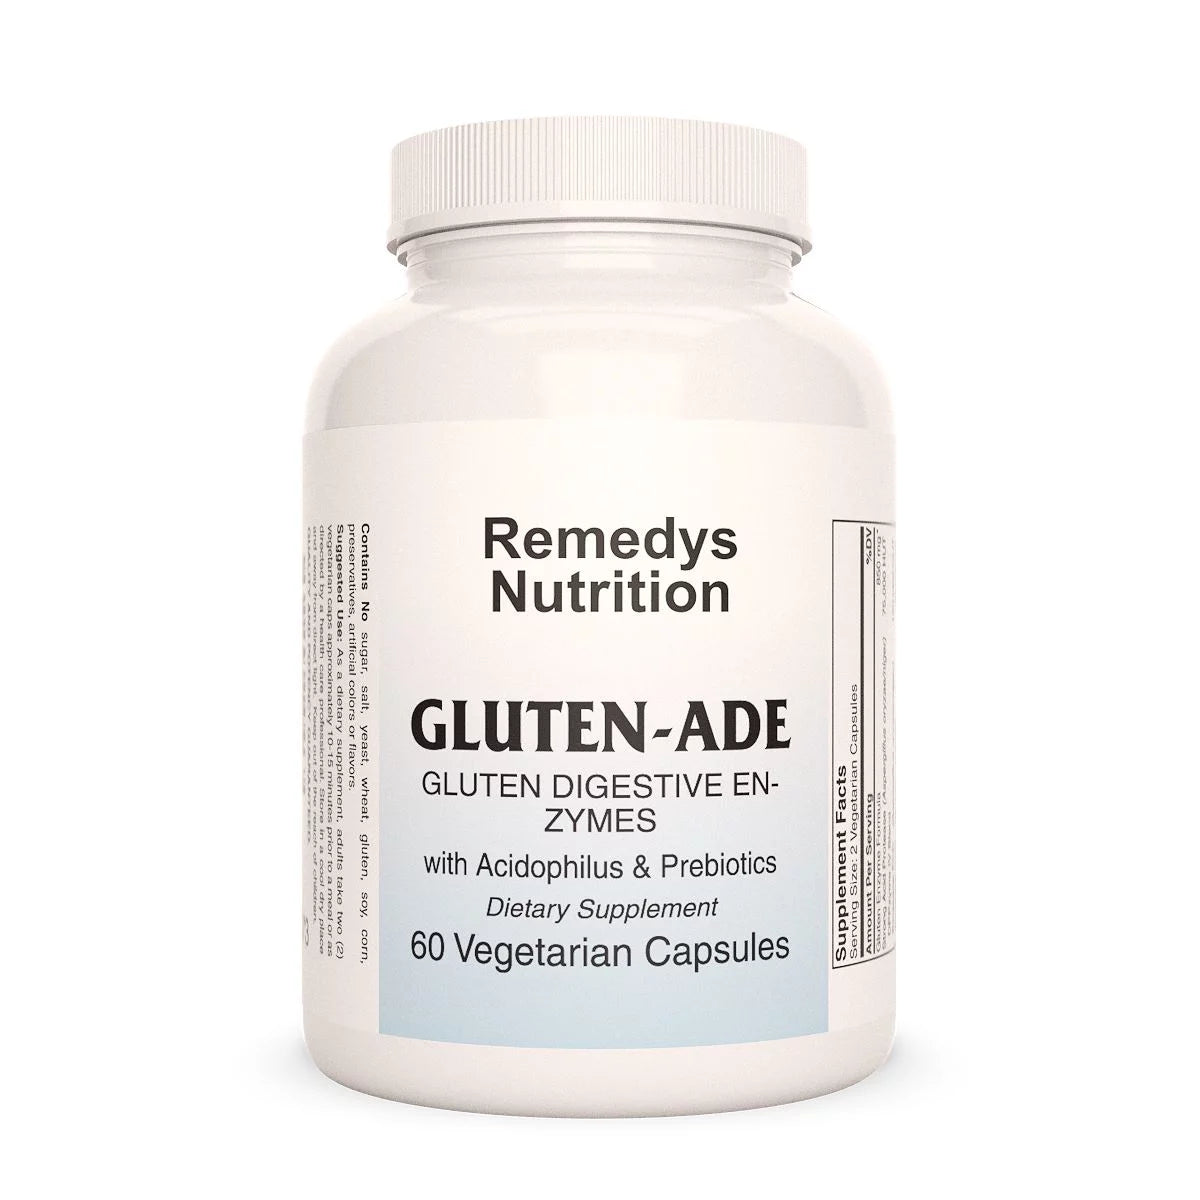 Image of Remedy's Nutrition® Gluten-Ade Digestive Enzymes Capsules Dietary Supplement front bottle.